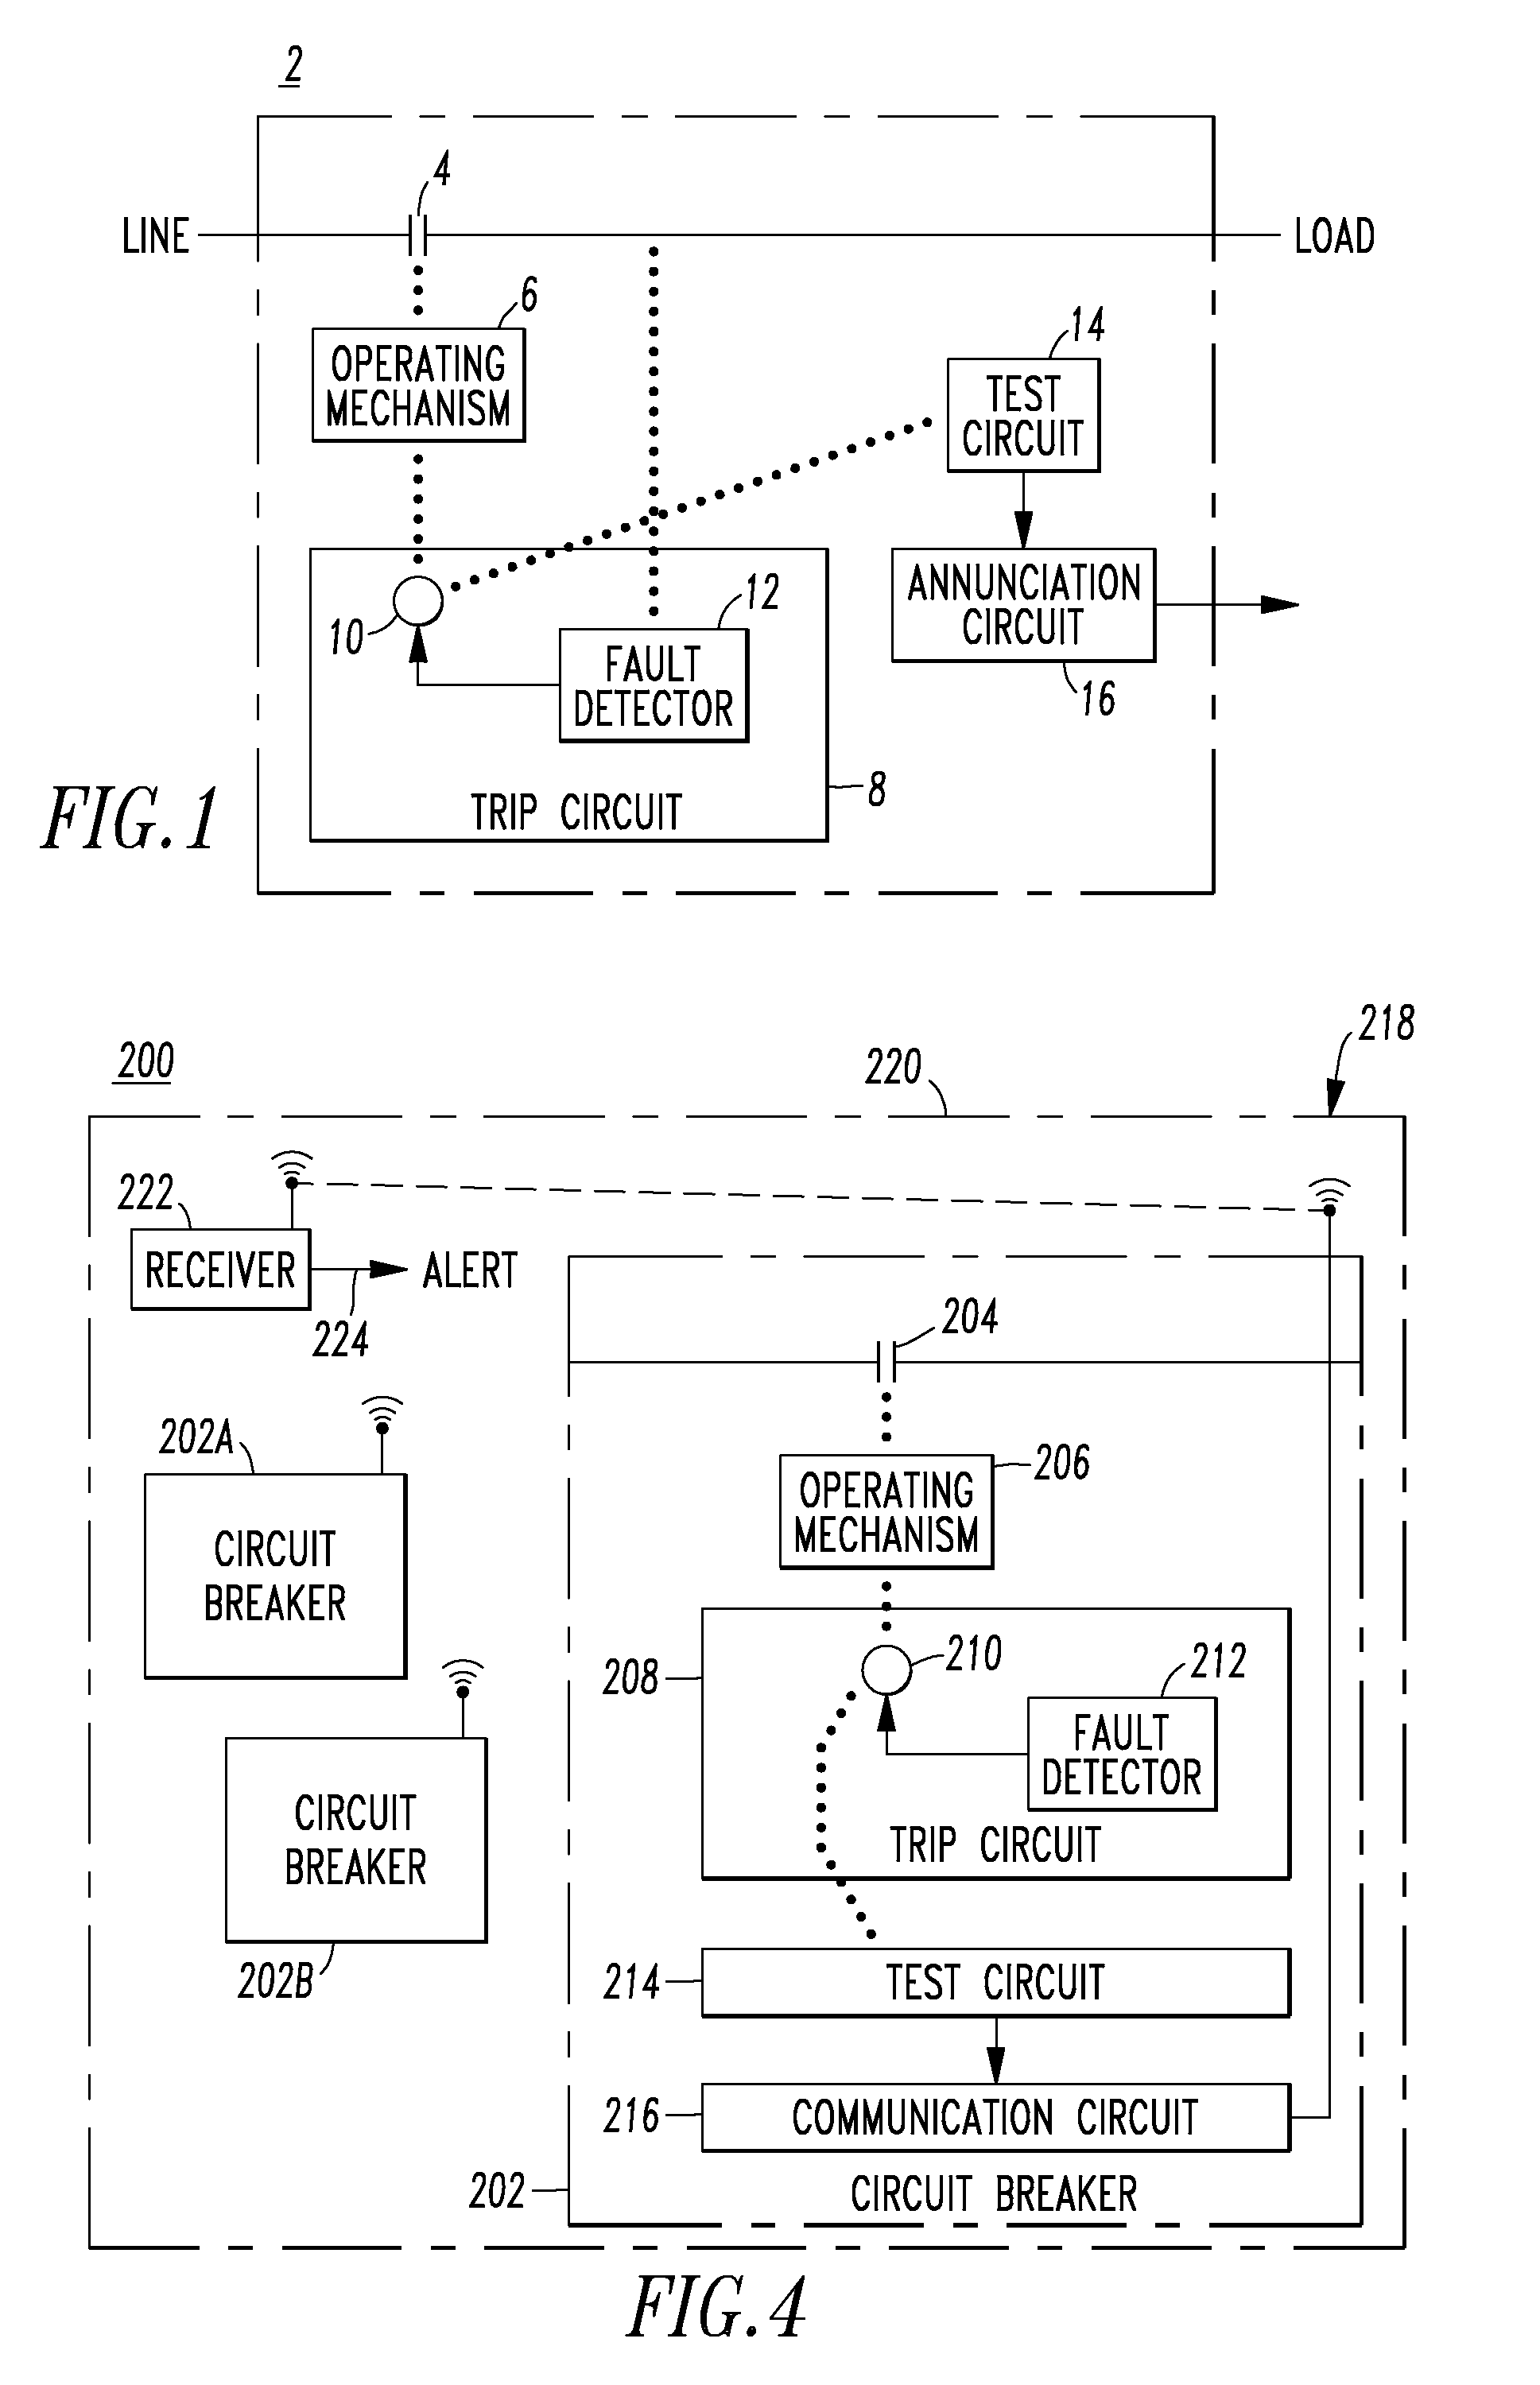 Communication interface apparatus for an electrical distribution panel, and system and electrical distribution panel including the same